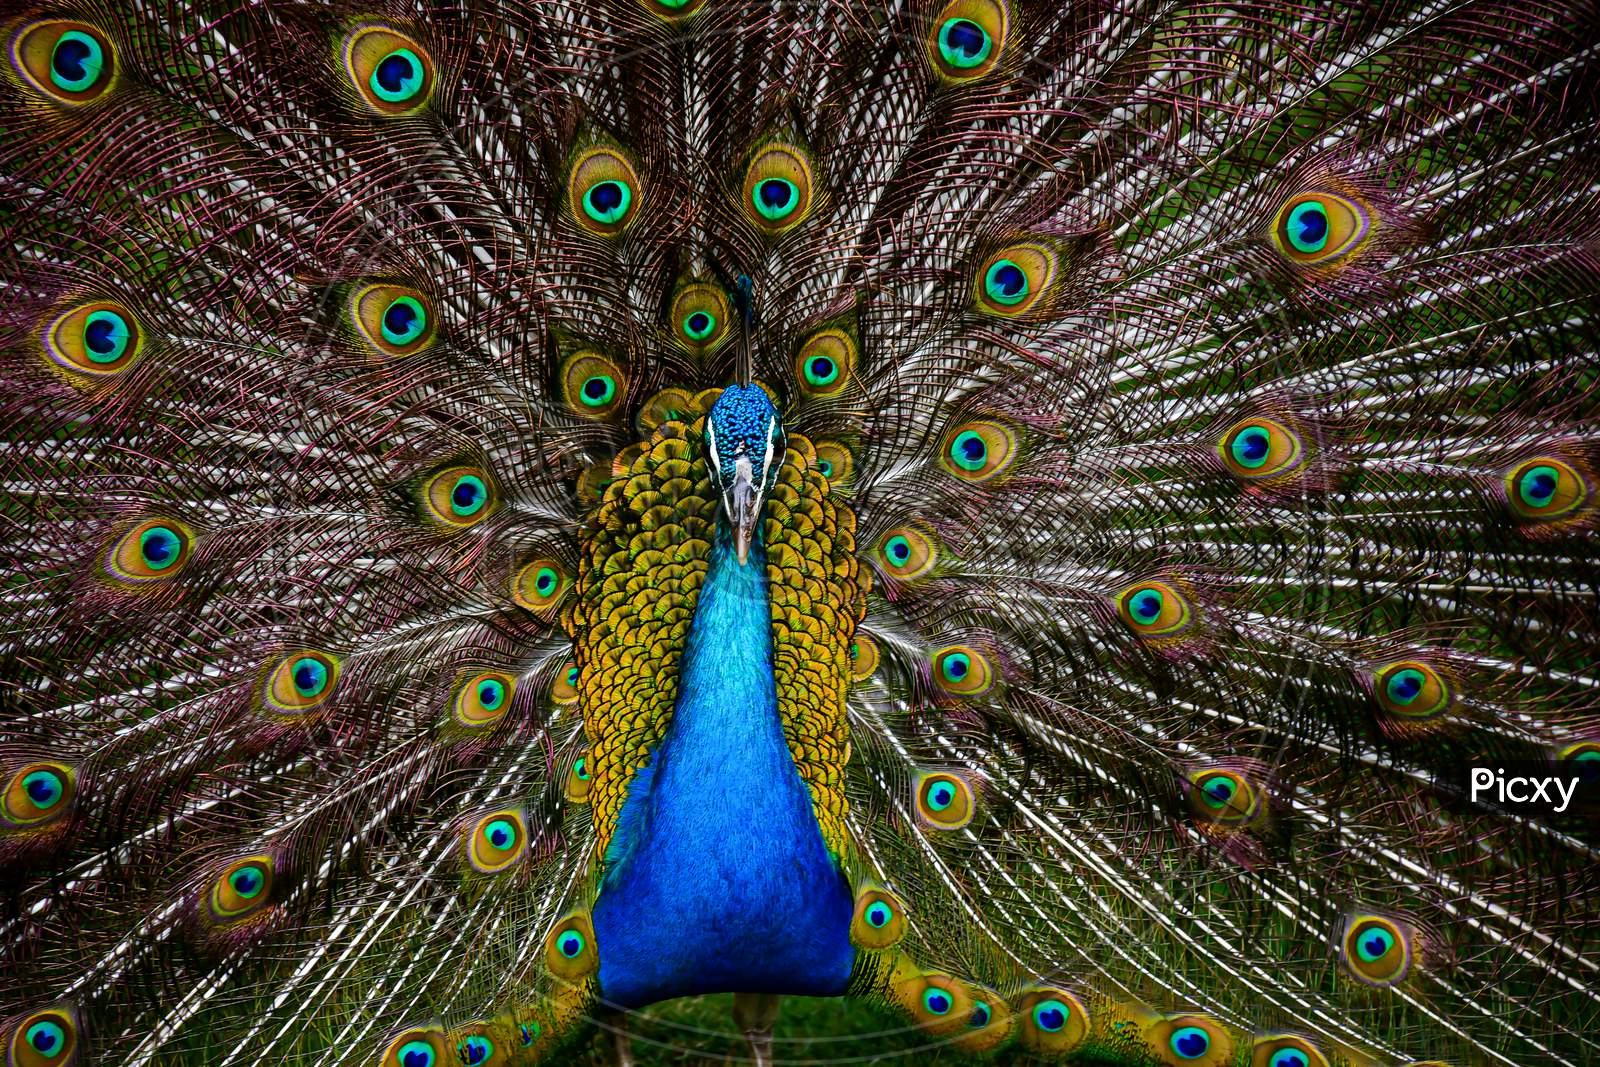 Close Up Of A Beautiful And Colourful Peacock Bird With Wide Opened Tail Full Of Long Feathers Standing On A Green Grass.